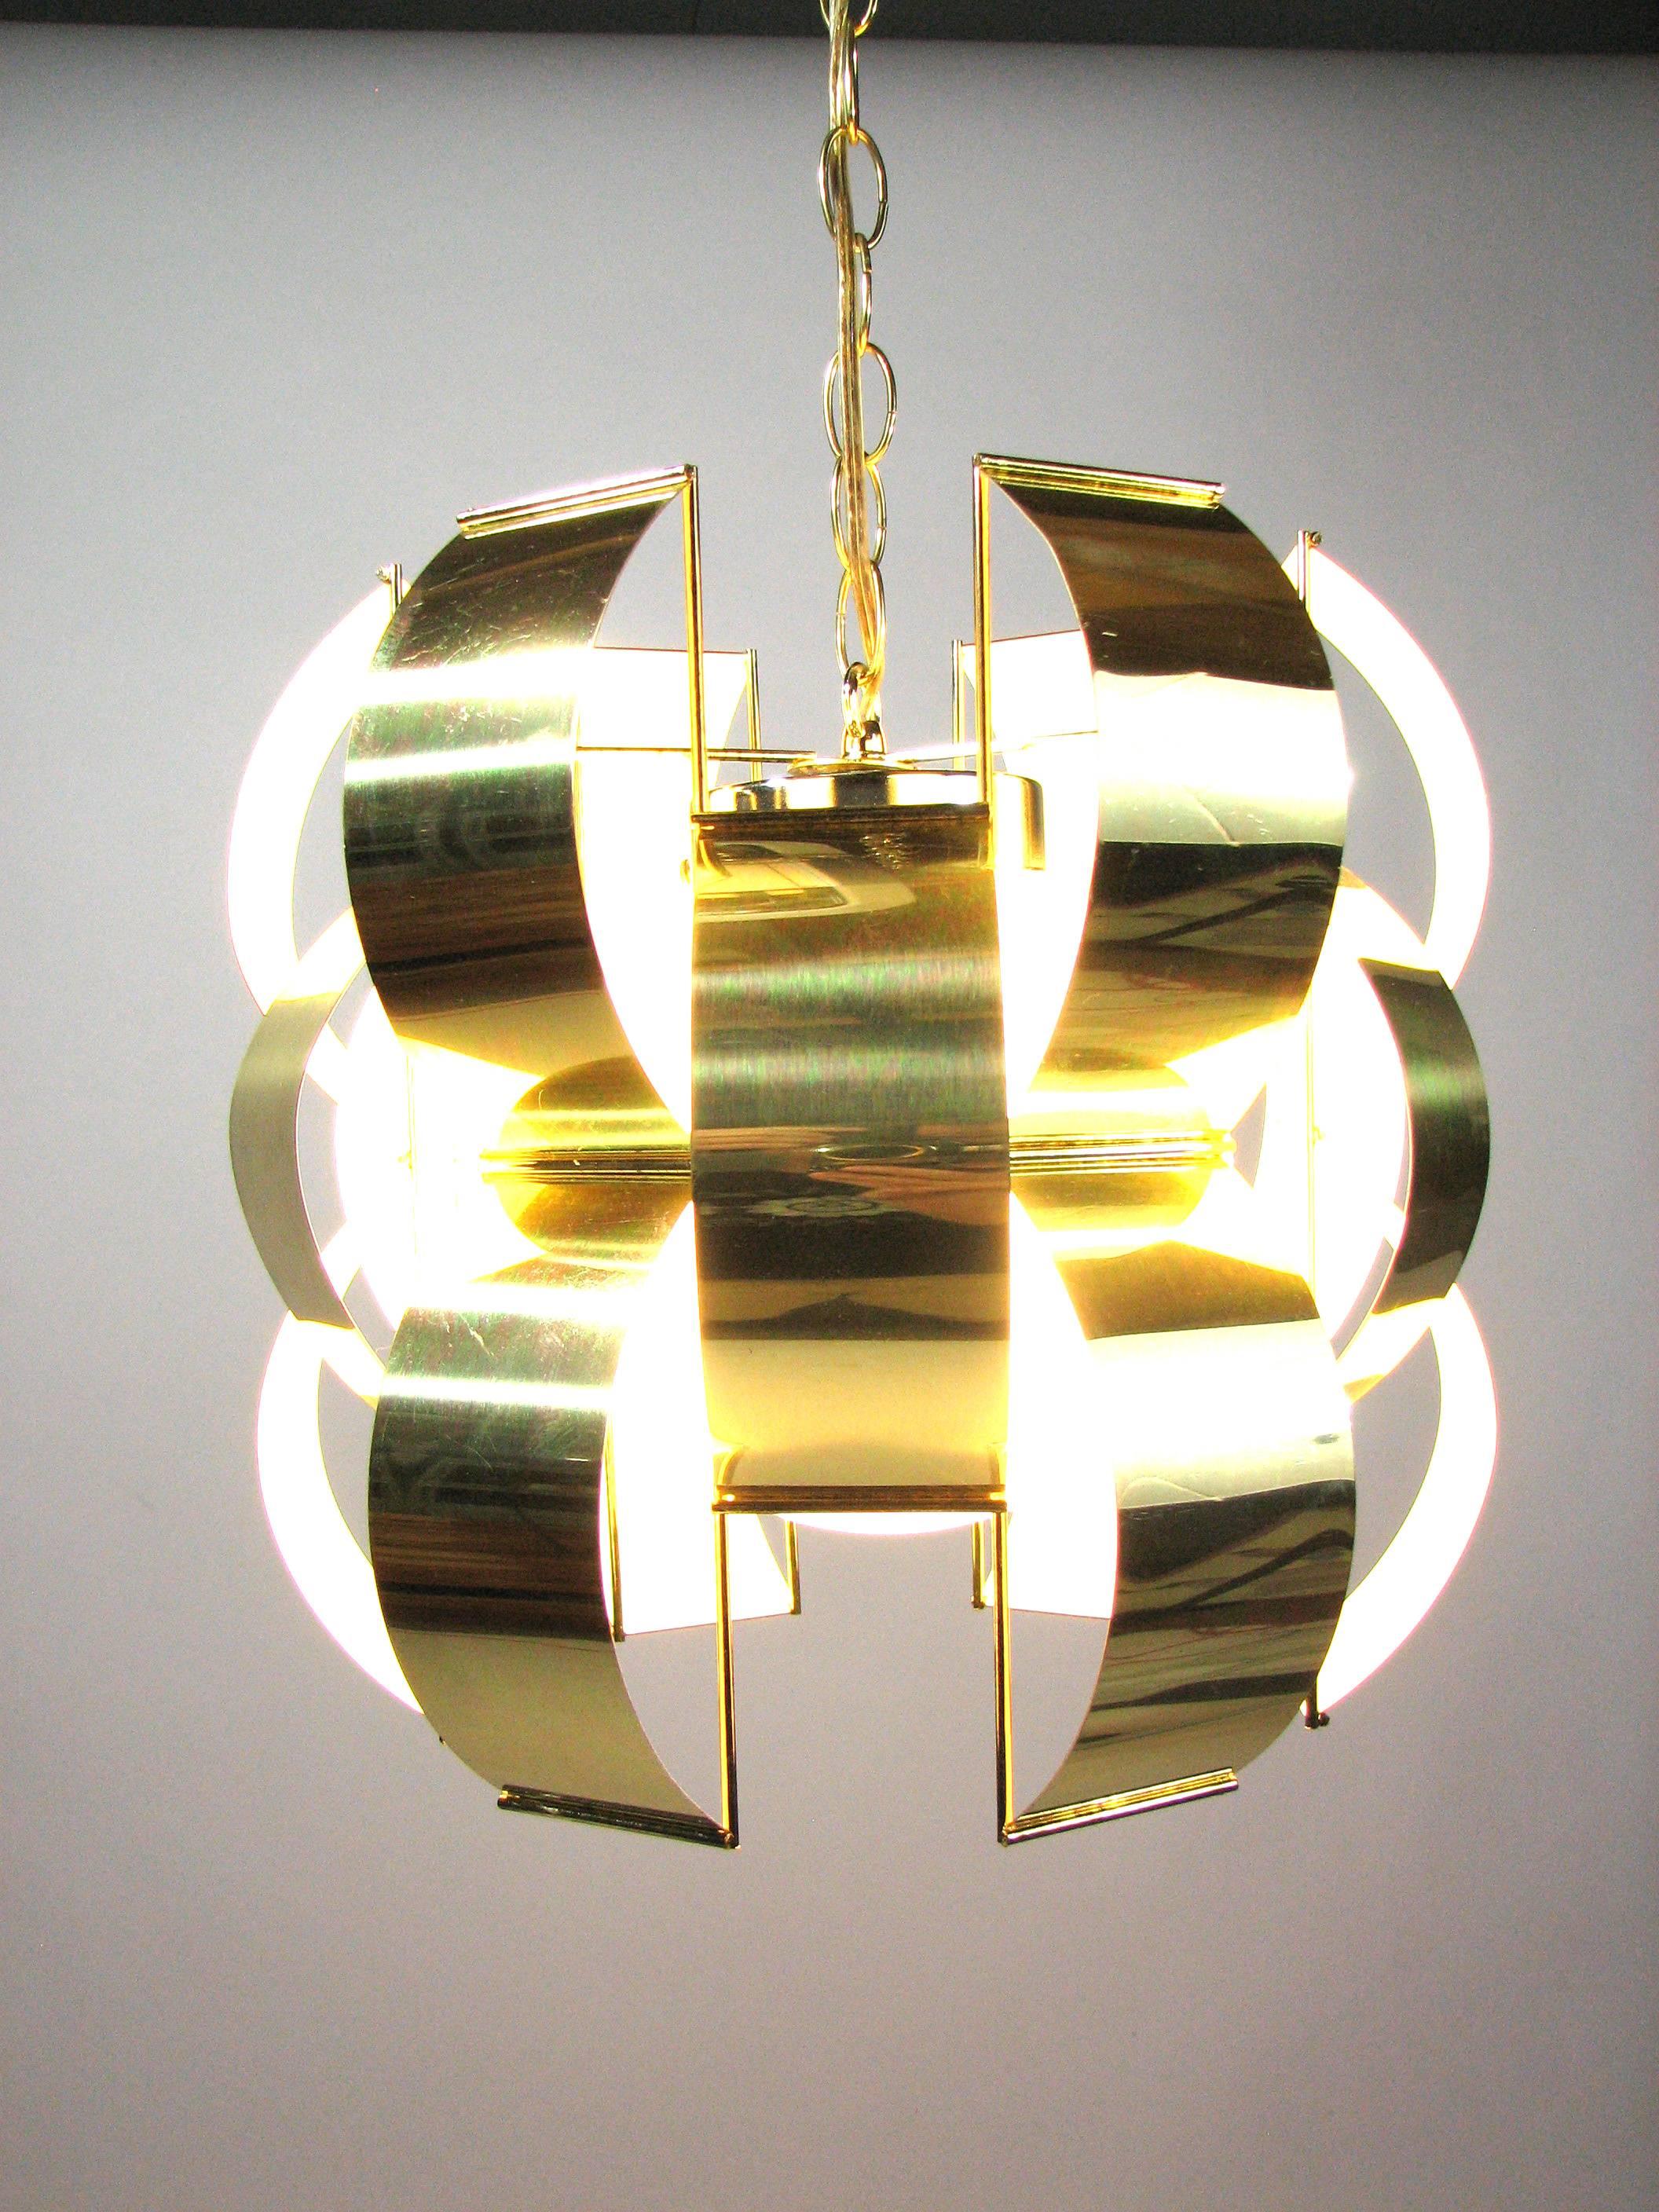 Polished brass "ribbons" enclose a single lamp in an opaque white globe at the center of this iconic Mid-Century Lightolier pendant light - an homage to 1960s lighting designer Max Sauze. The soft atmospheric glow and open downright make